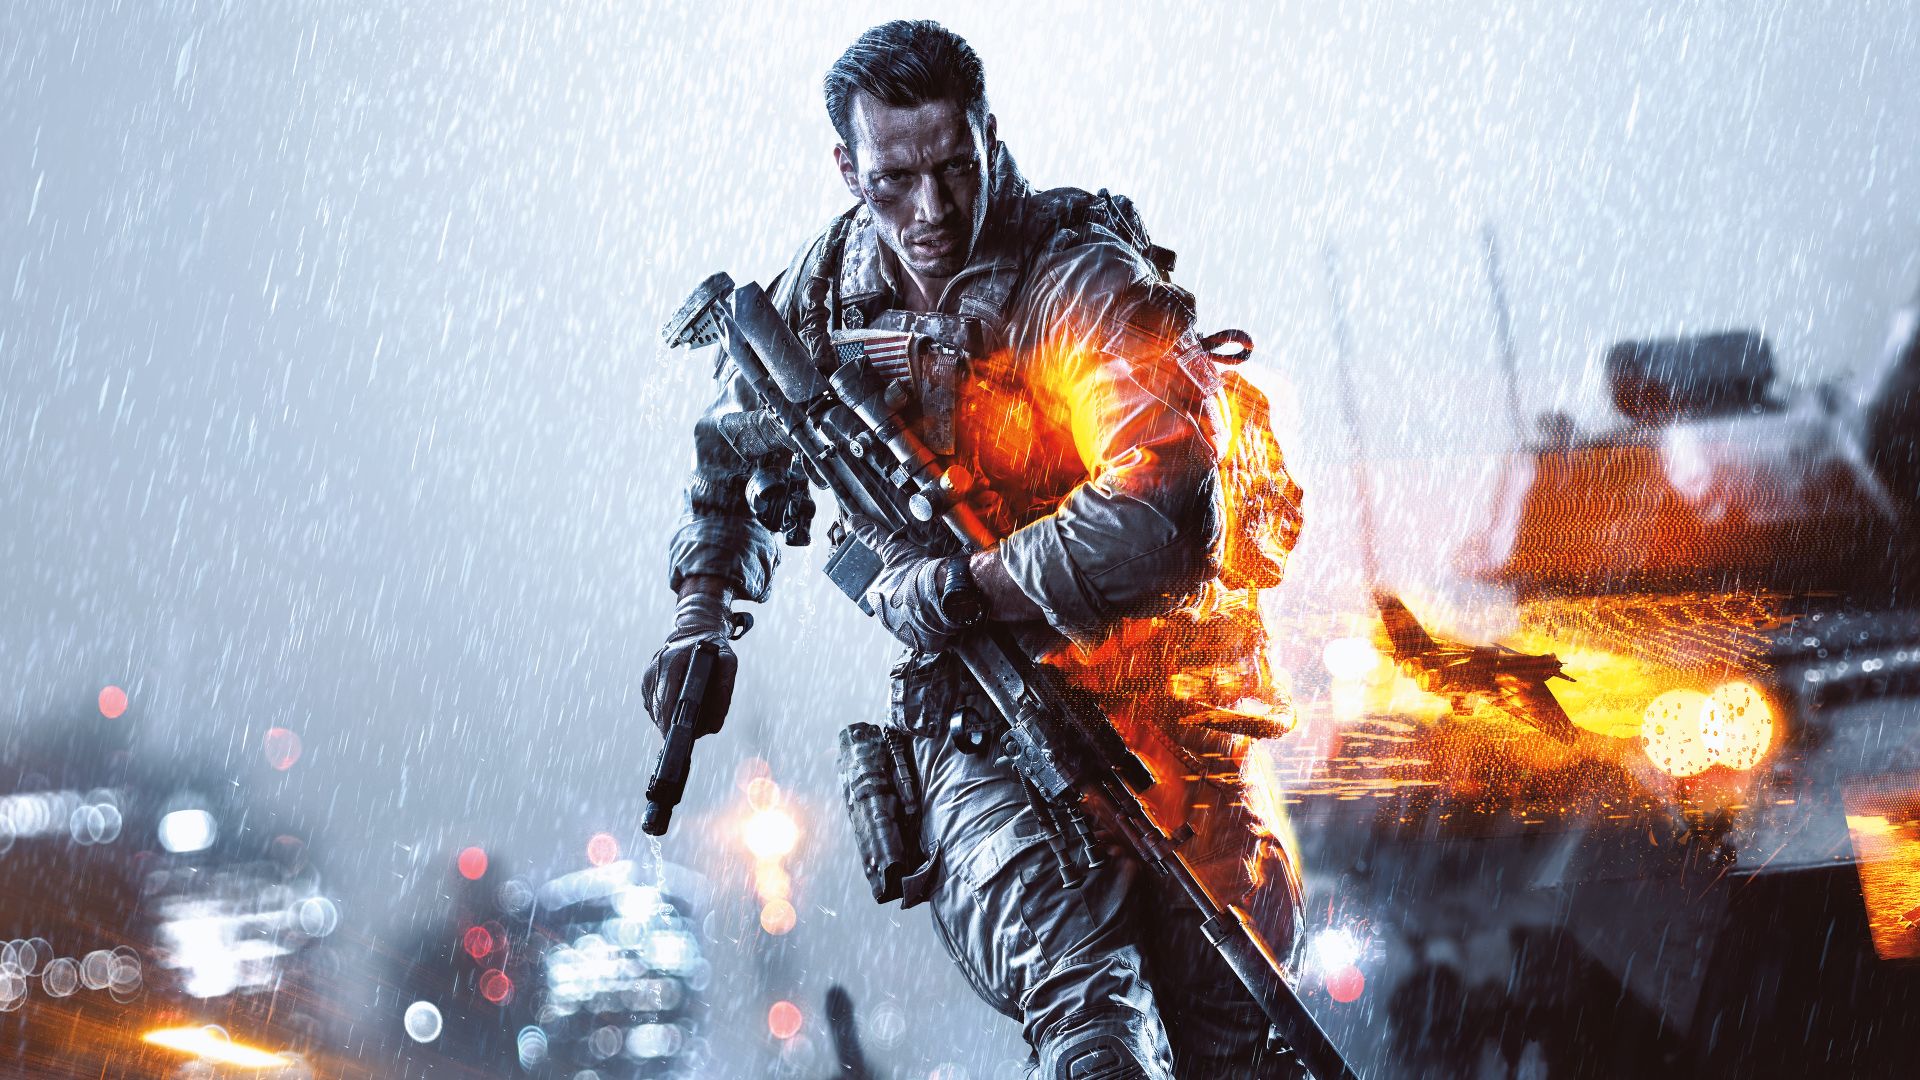 Battlefield 4 Pc Is Currently Free For Amazon Prime Members Vgc